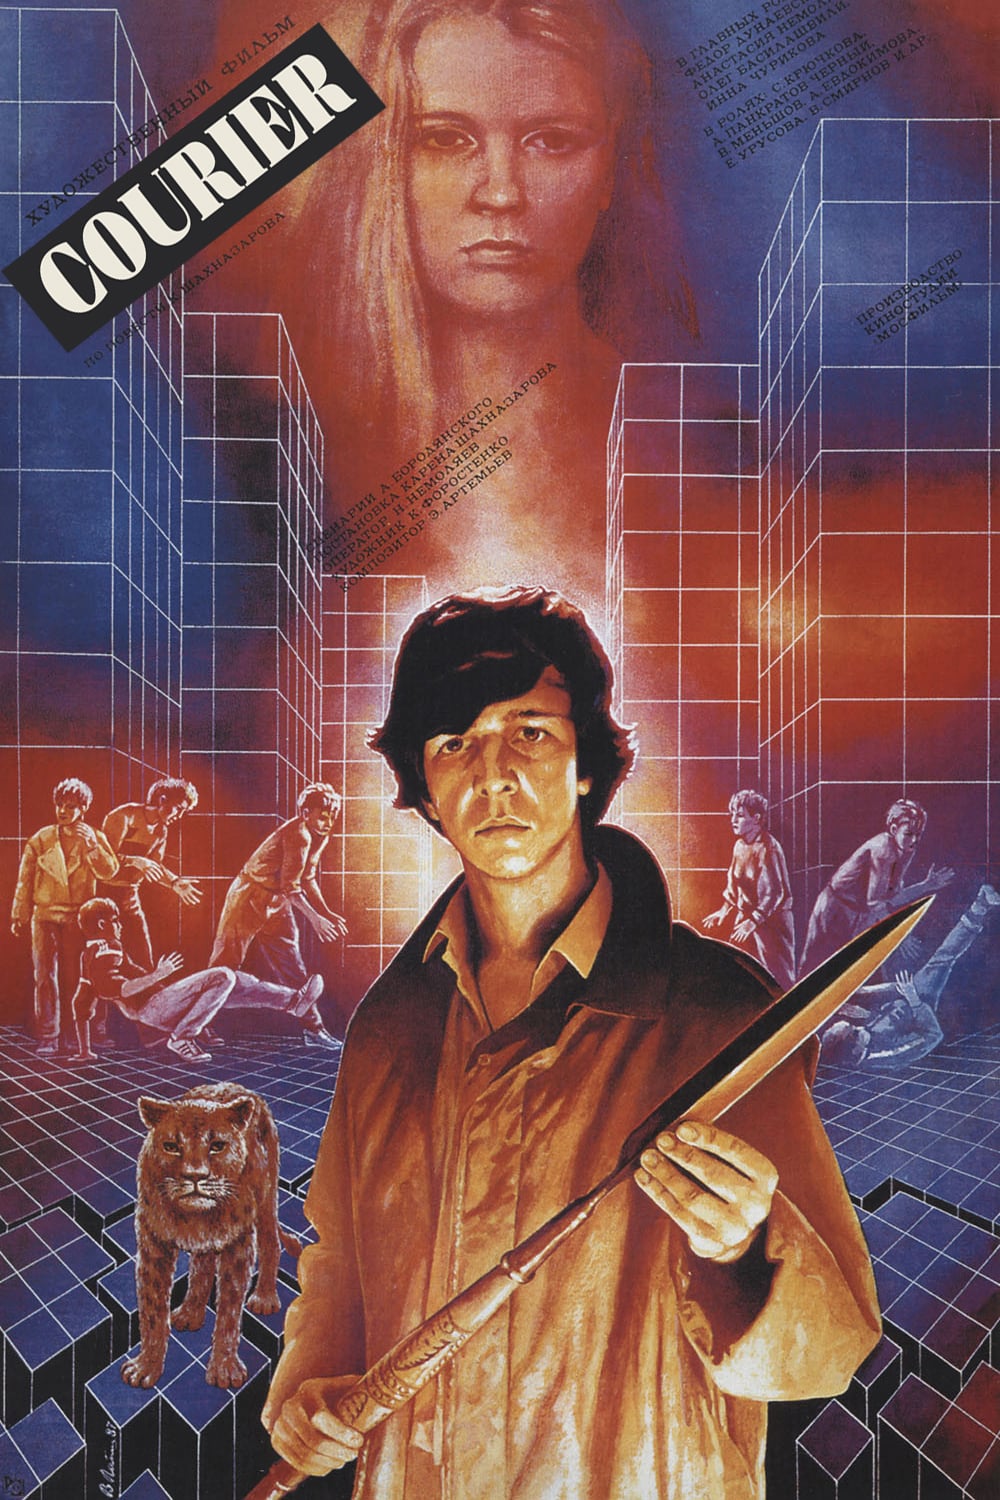 Courier (1986)